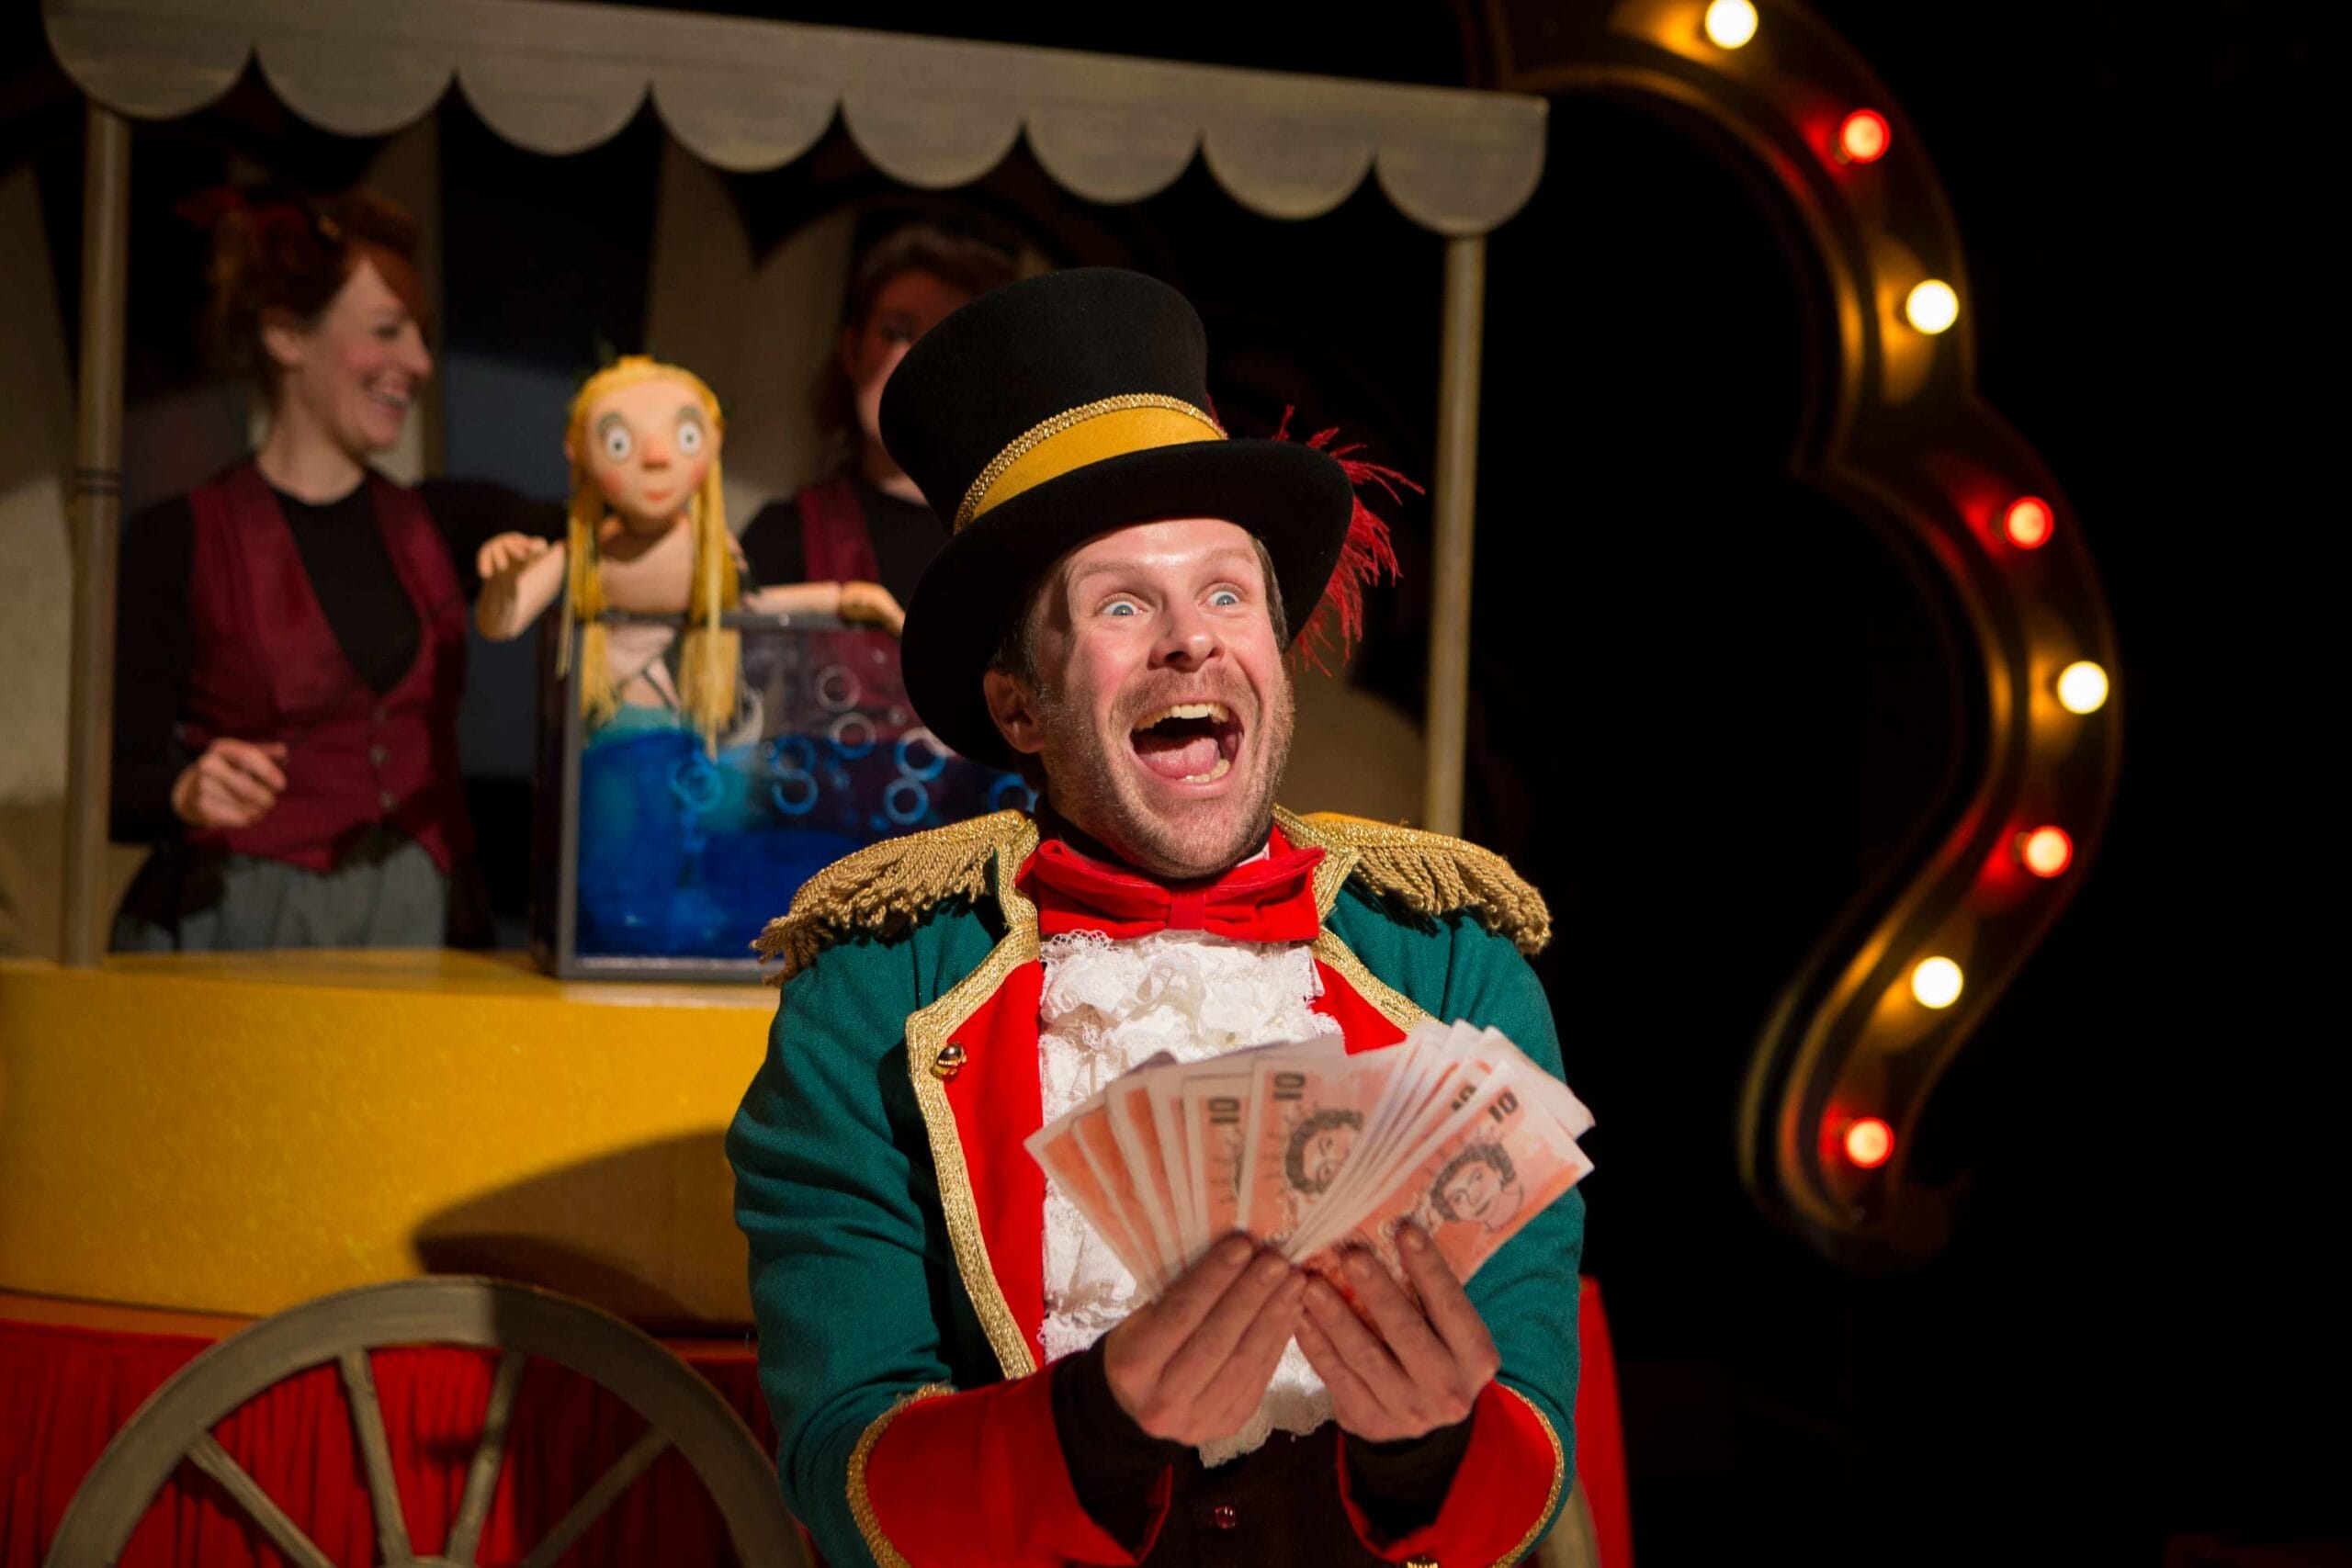 An actor dressed as Sam Sly holds up a lot of money looking elated. Behind him, the Singing Mermaid puppet sits in her tank. Two puppeteers can be seen in the background.